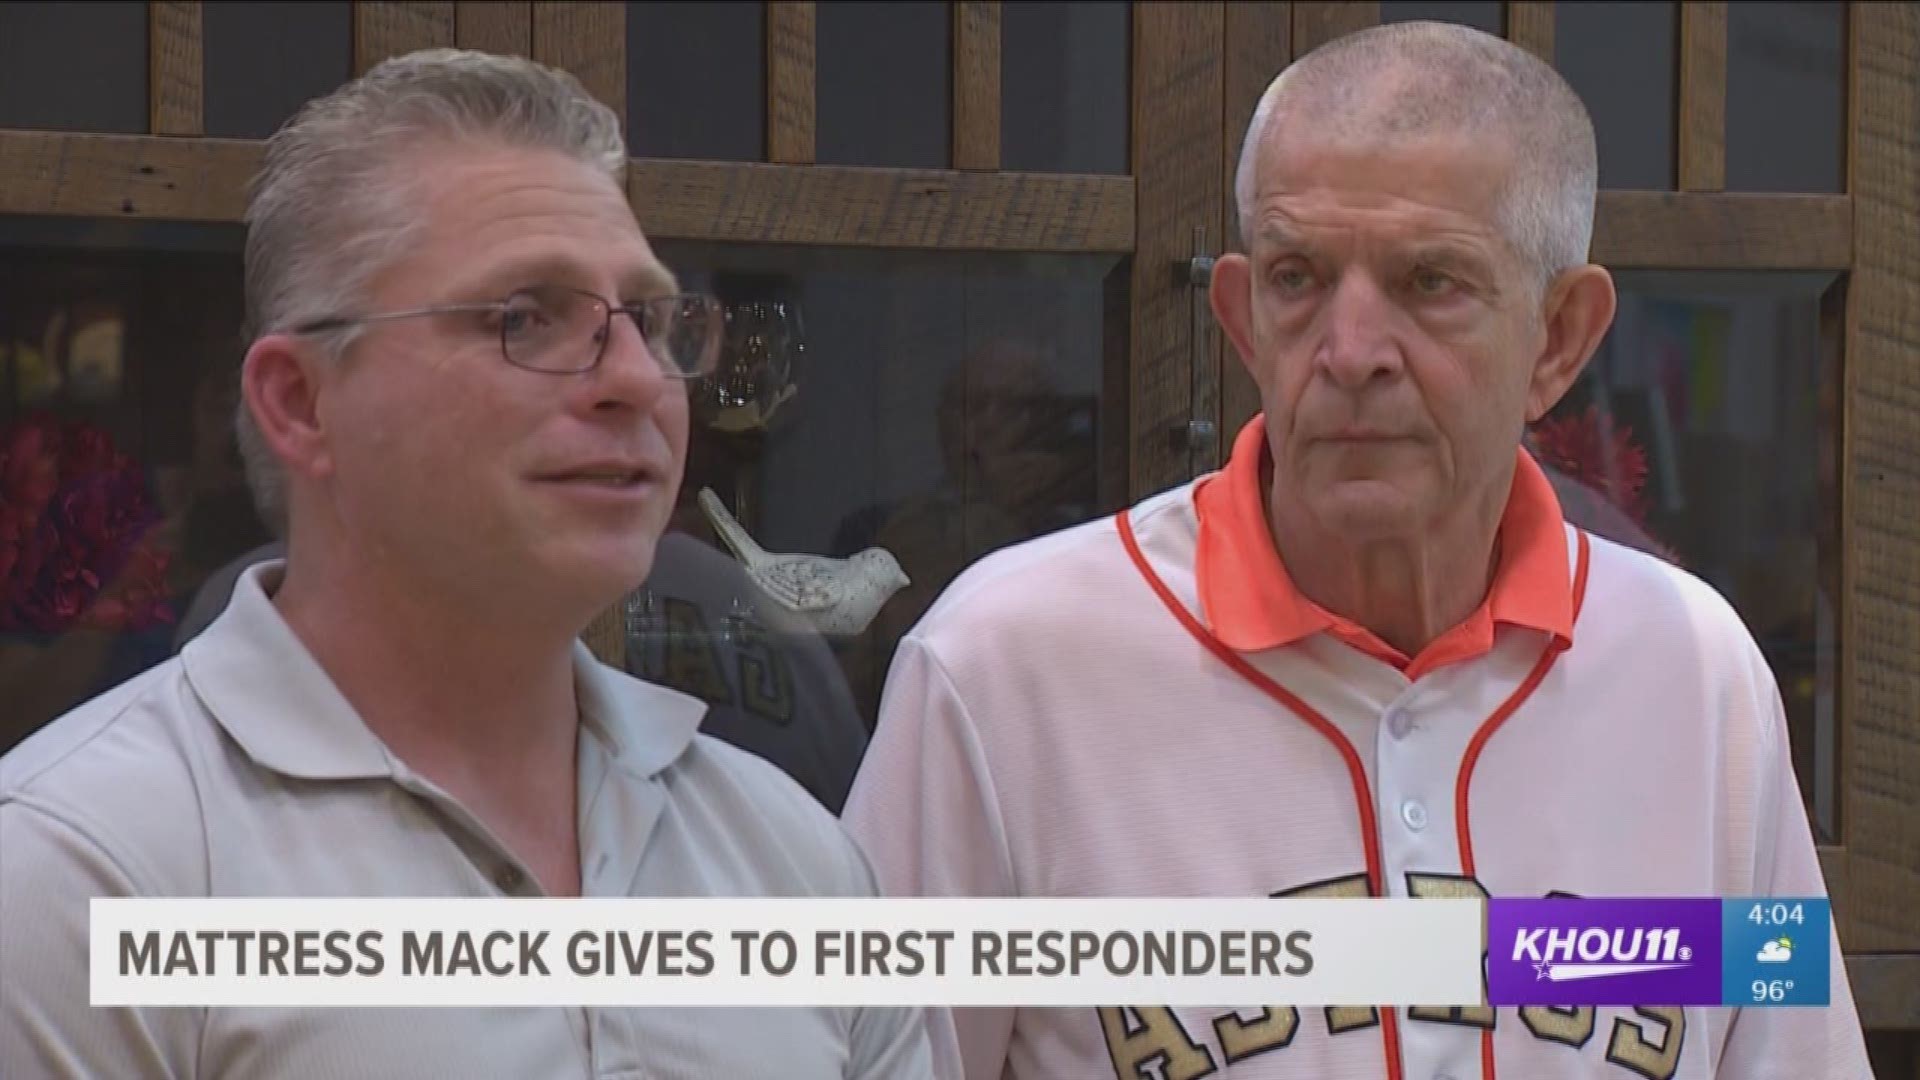 Jim McIngvale also known as Mattress Mack is giving $10k worth of furniture to furnish a new apartment for first responders to stay in as they receive treatment in the Medical Center.